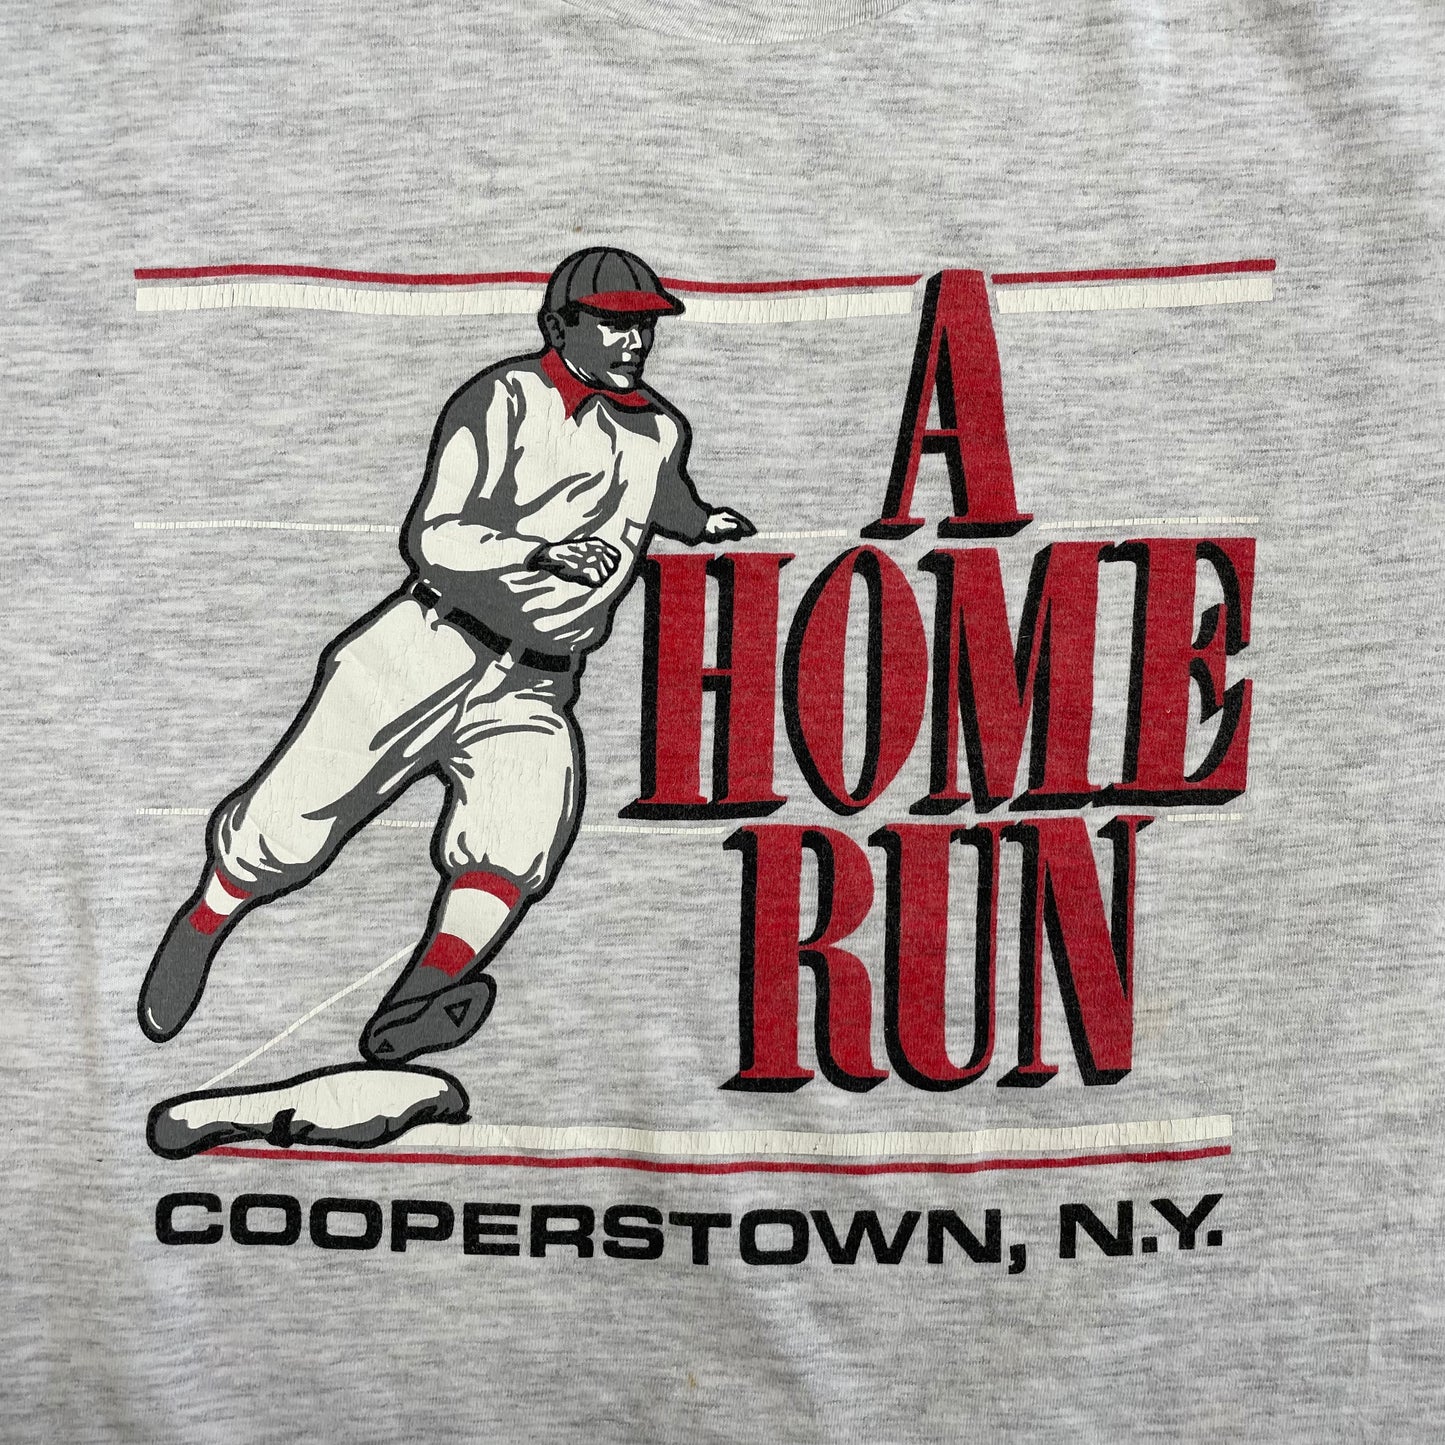 Vintage Single Stitch T-Shirt Hanes Beefy “A Home Run Cooperstown, N.Y.” Made in USA